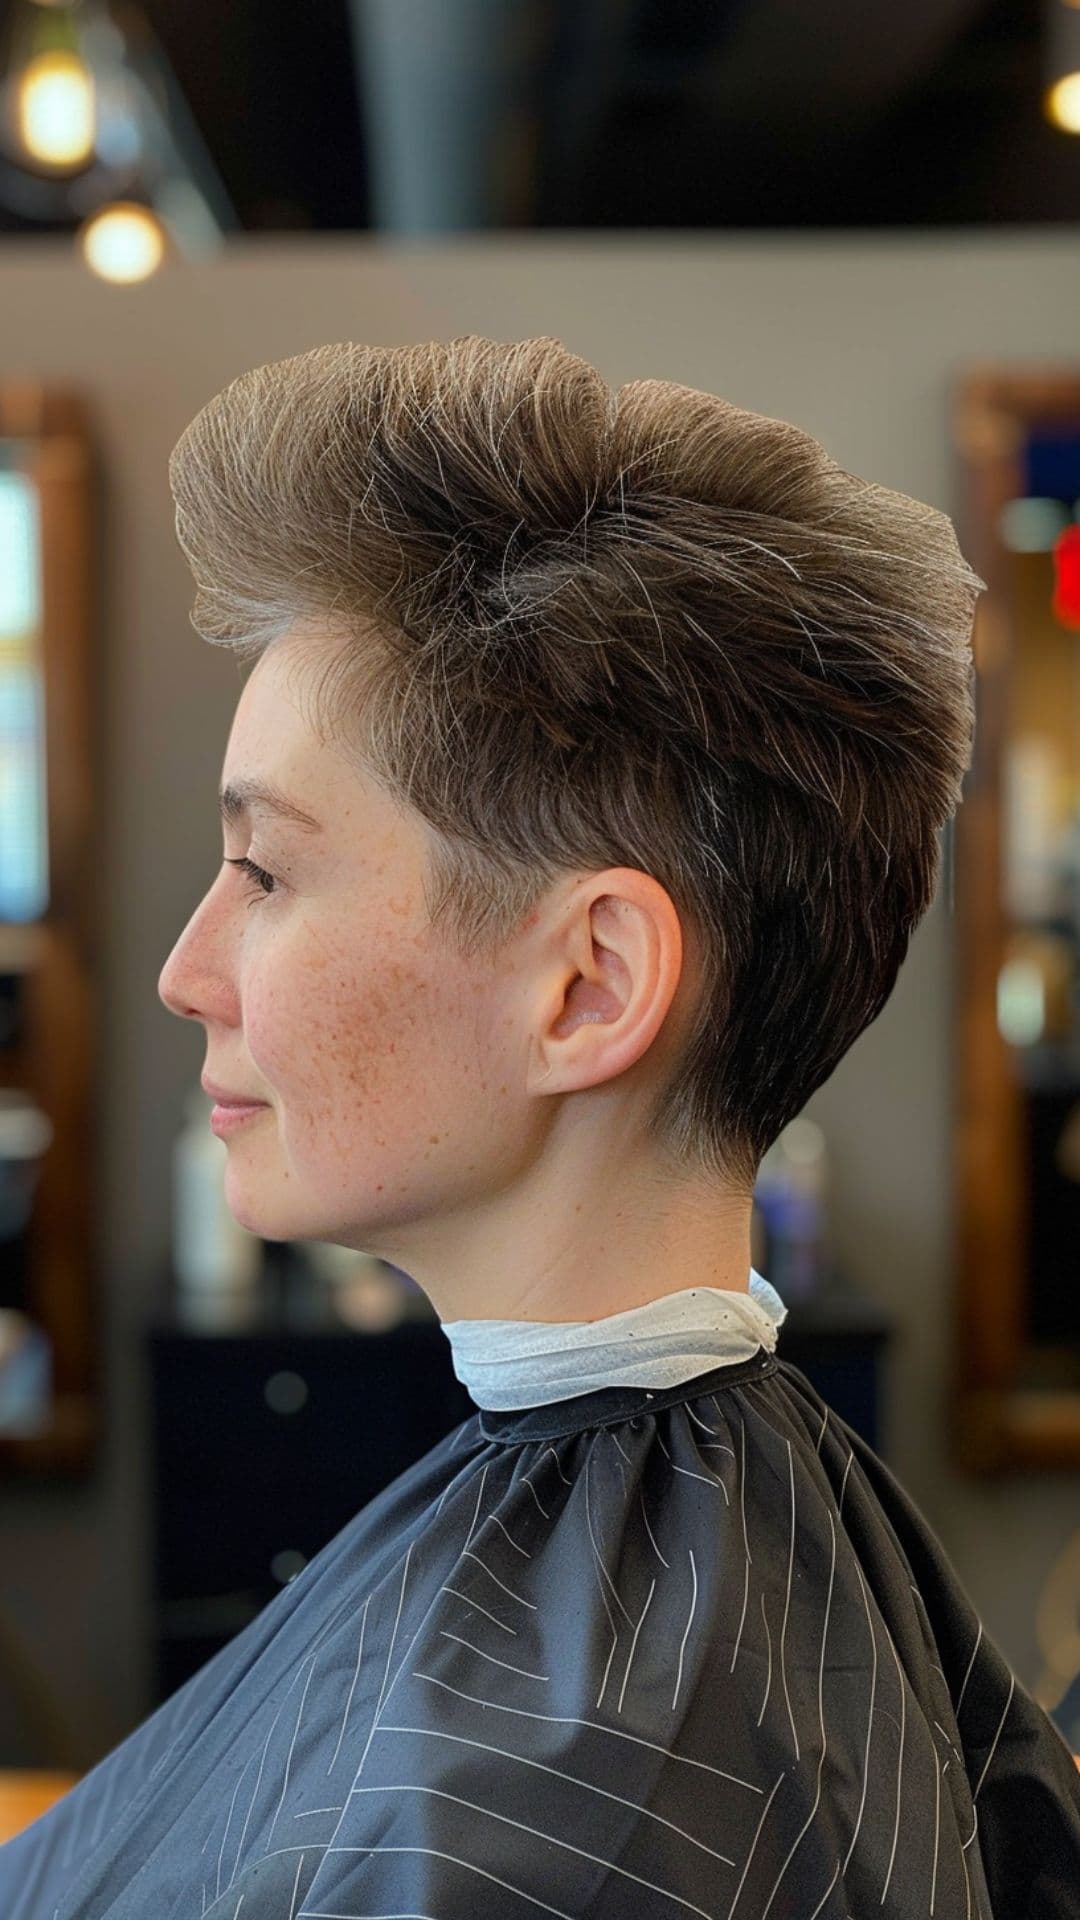 An old woman modelling a tapered cut with volume hair.